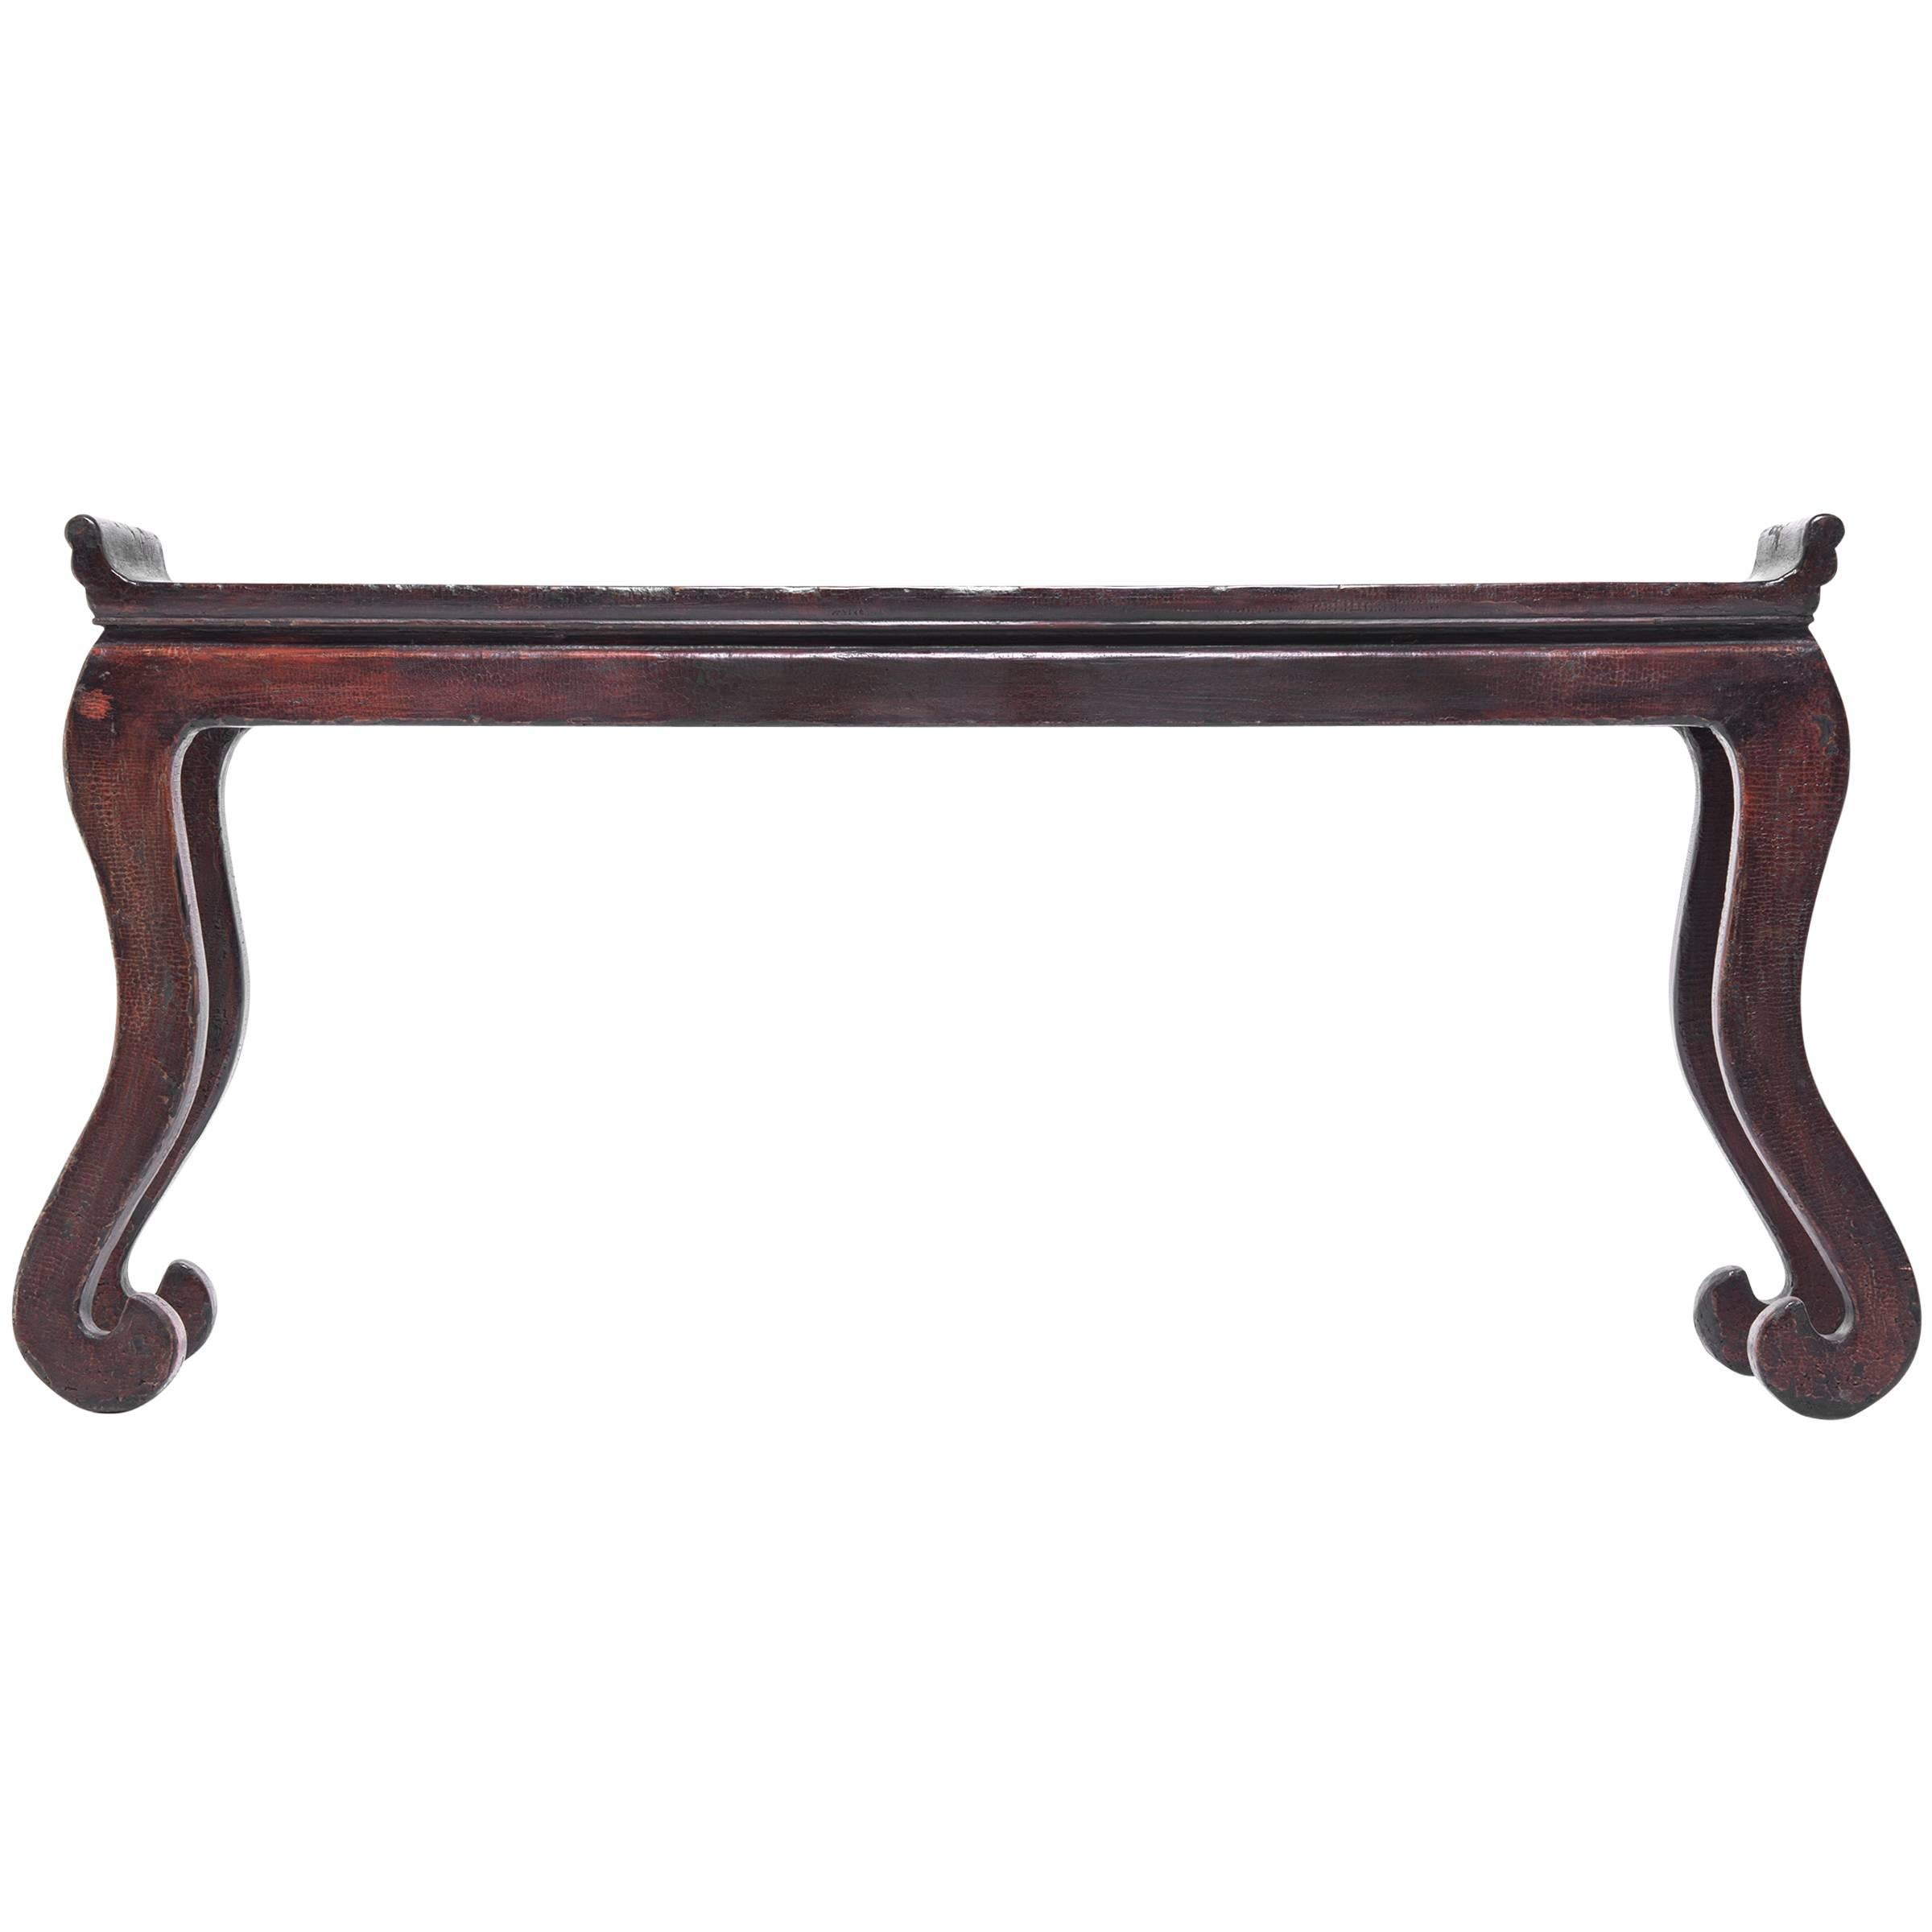 Red Crackled Lacquer Scroll Table